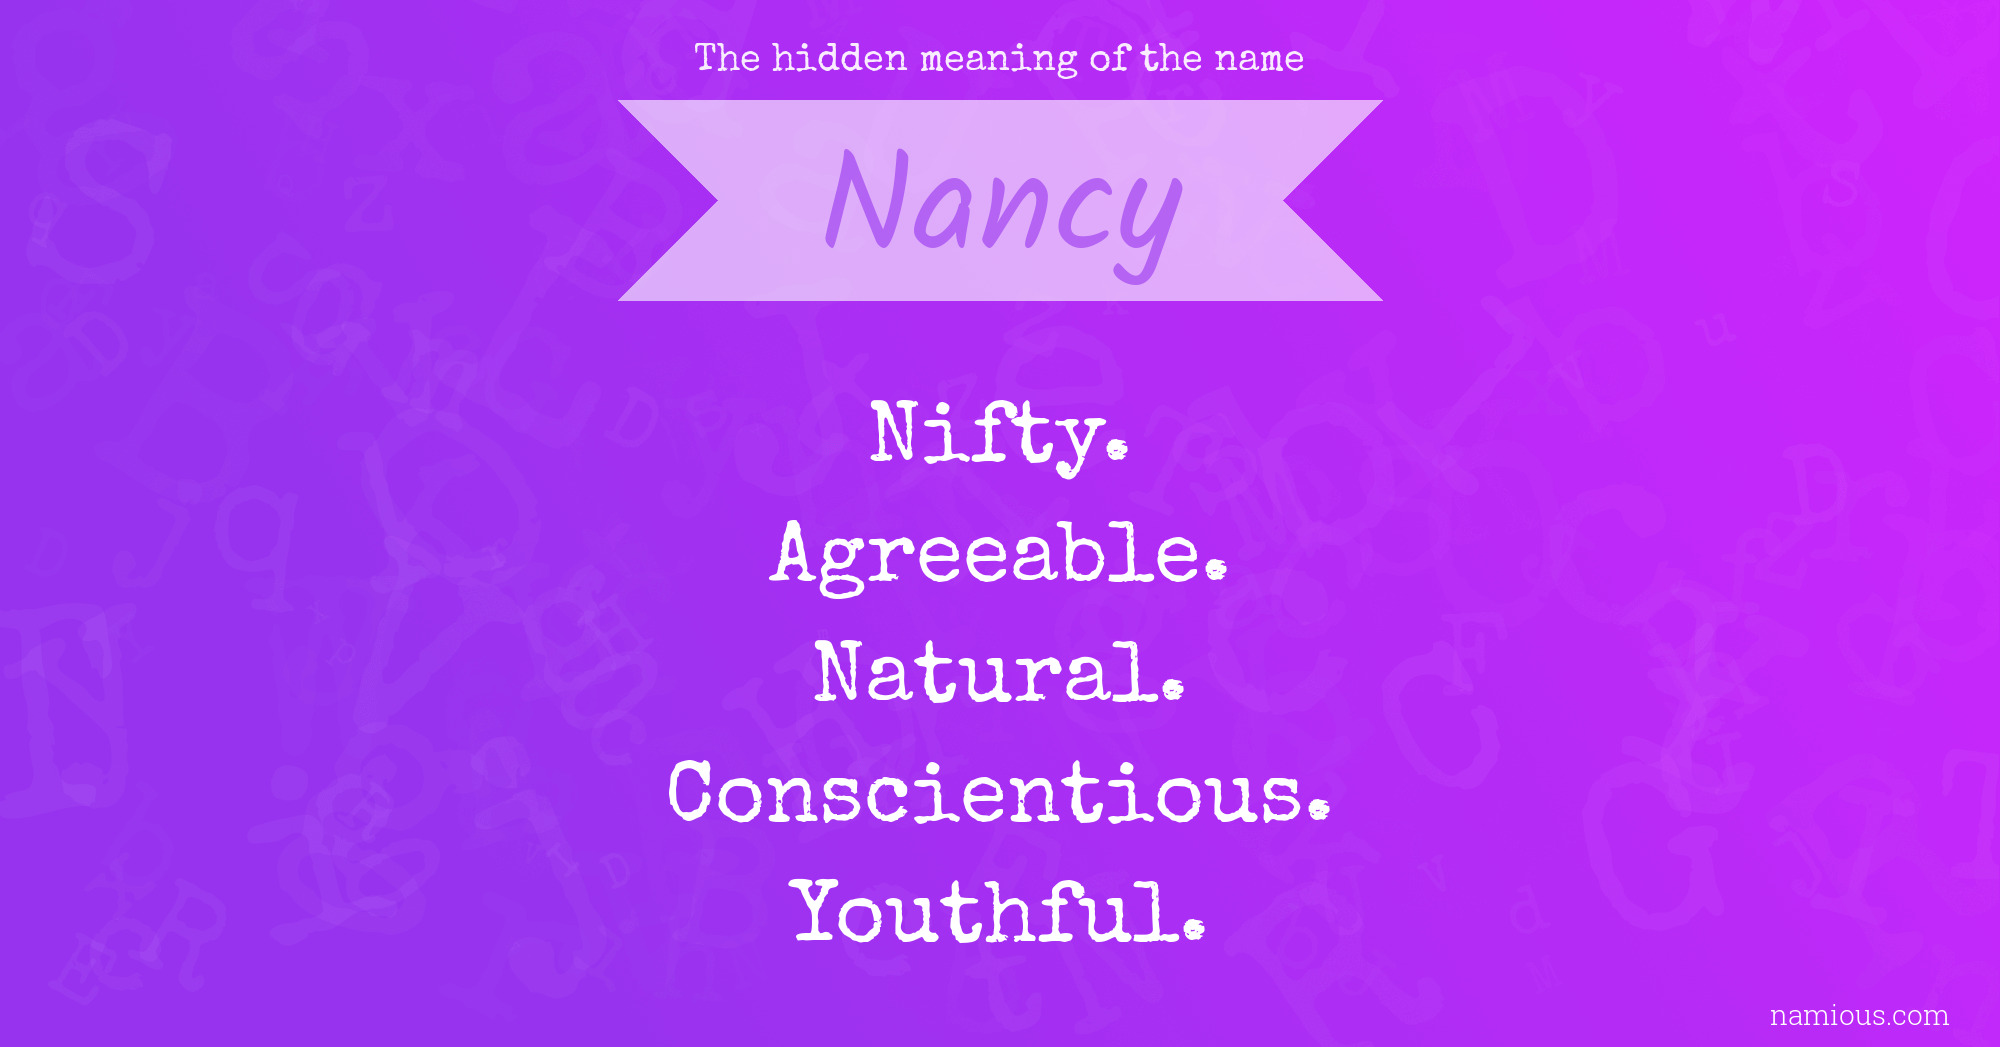 The hidden meaning of the name Nancy